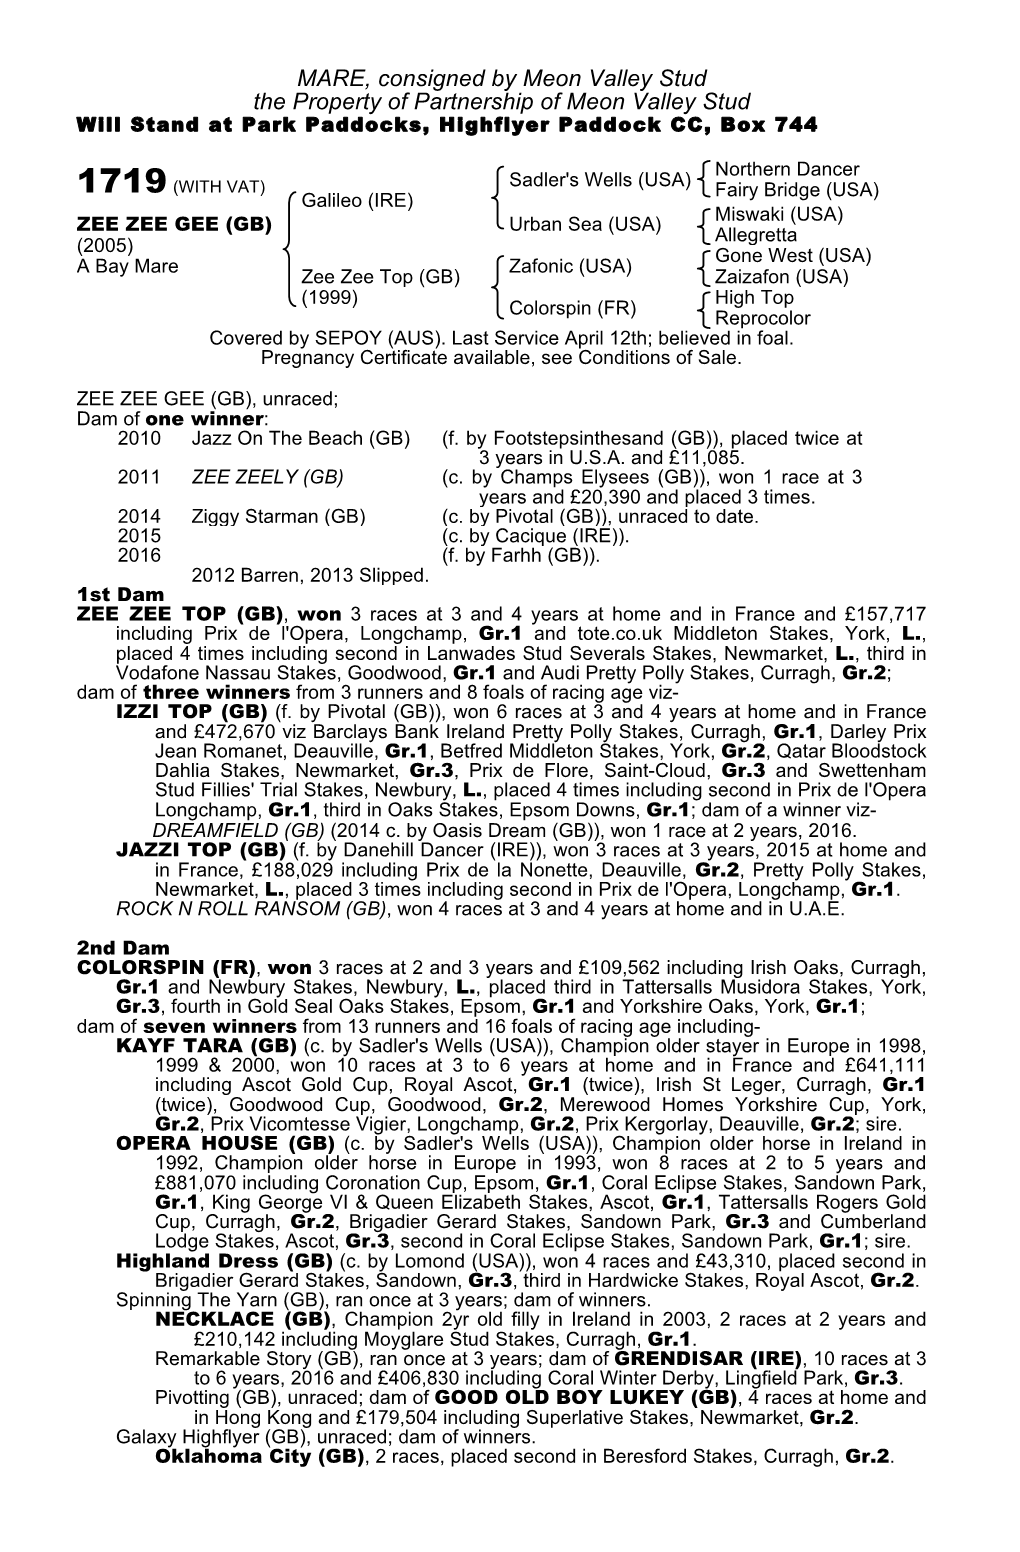 MARE, Consigned by Meon Valley Stud the Property of Partnership of Meon Valley Stud Will Stand at Park Paddocks, Highflyer Paddock CC, Box 744